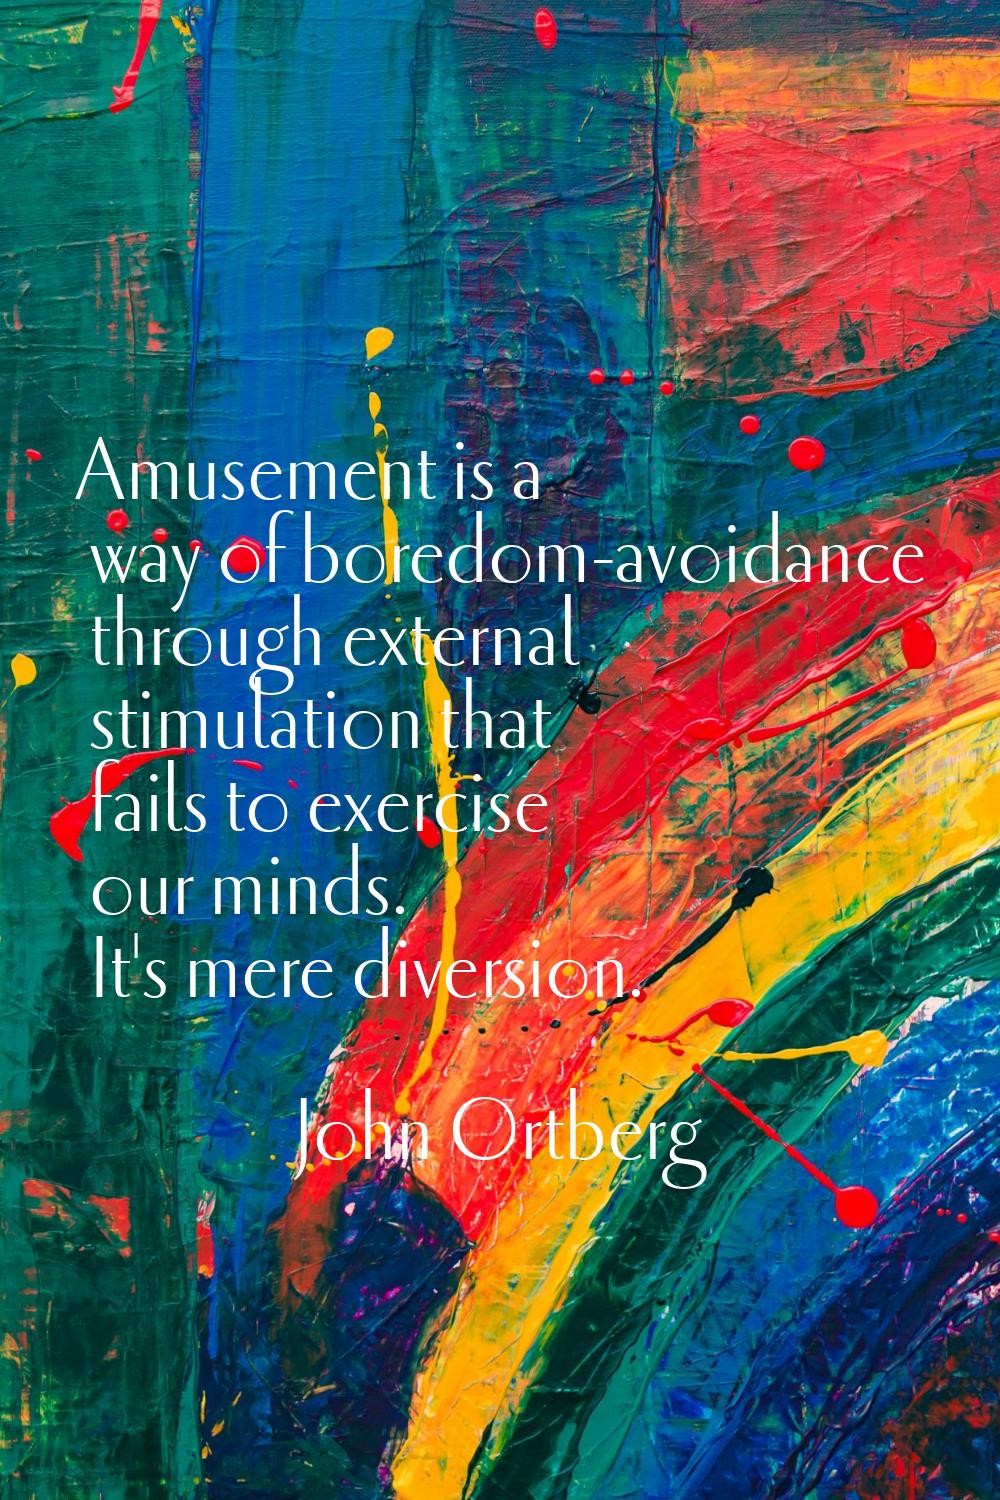 Amusement is a way of boredom-avoidance through external stimulation that fails to exercise our min